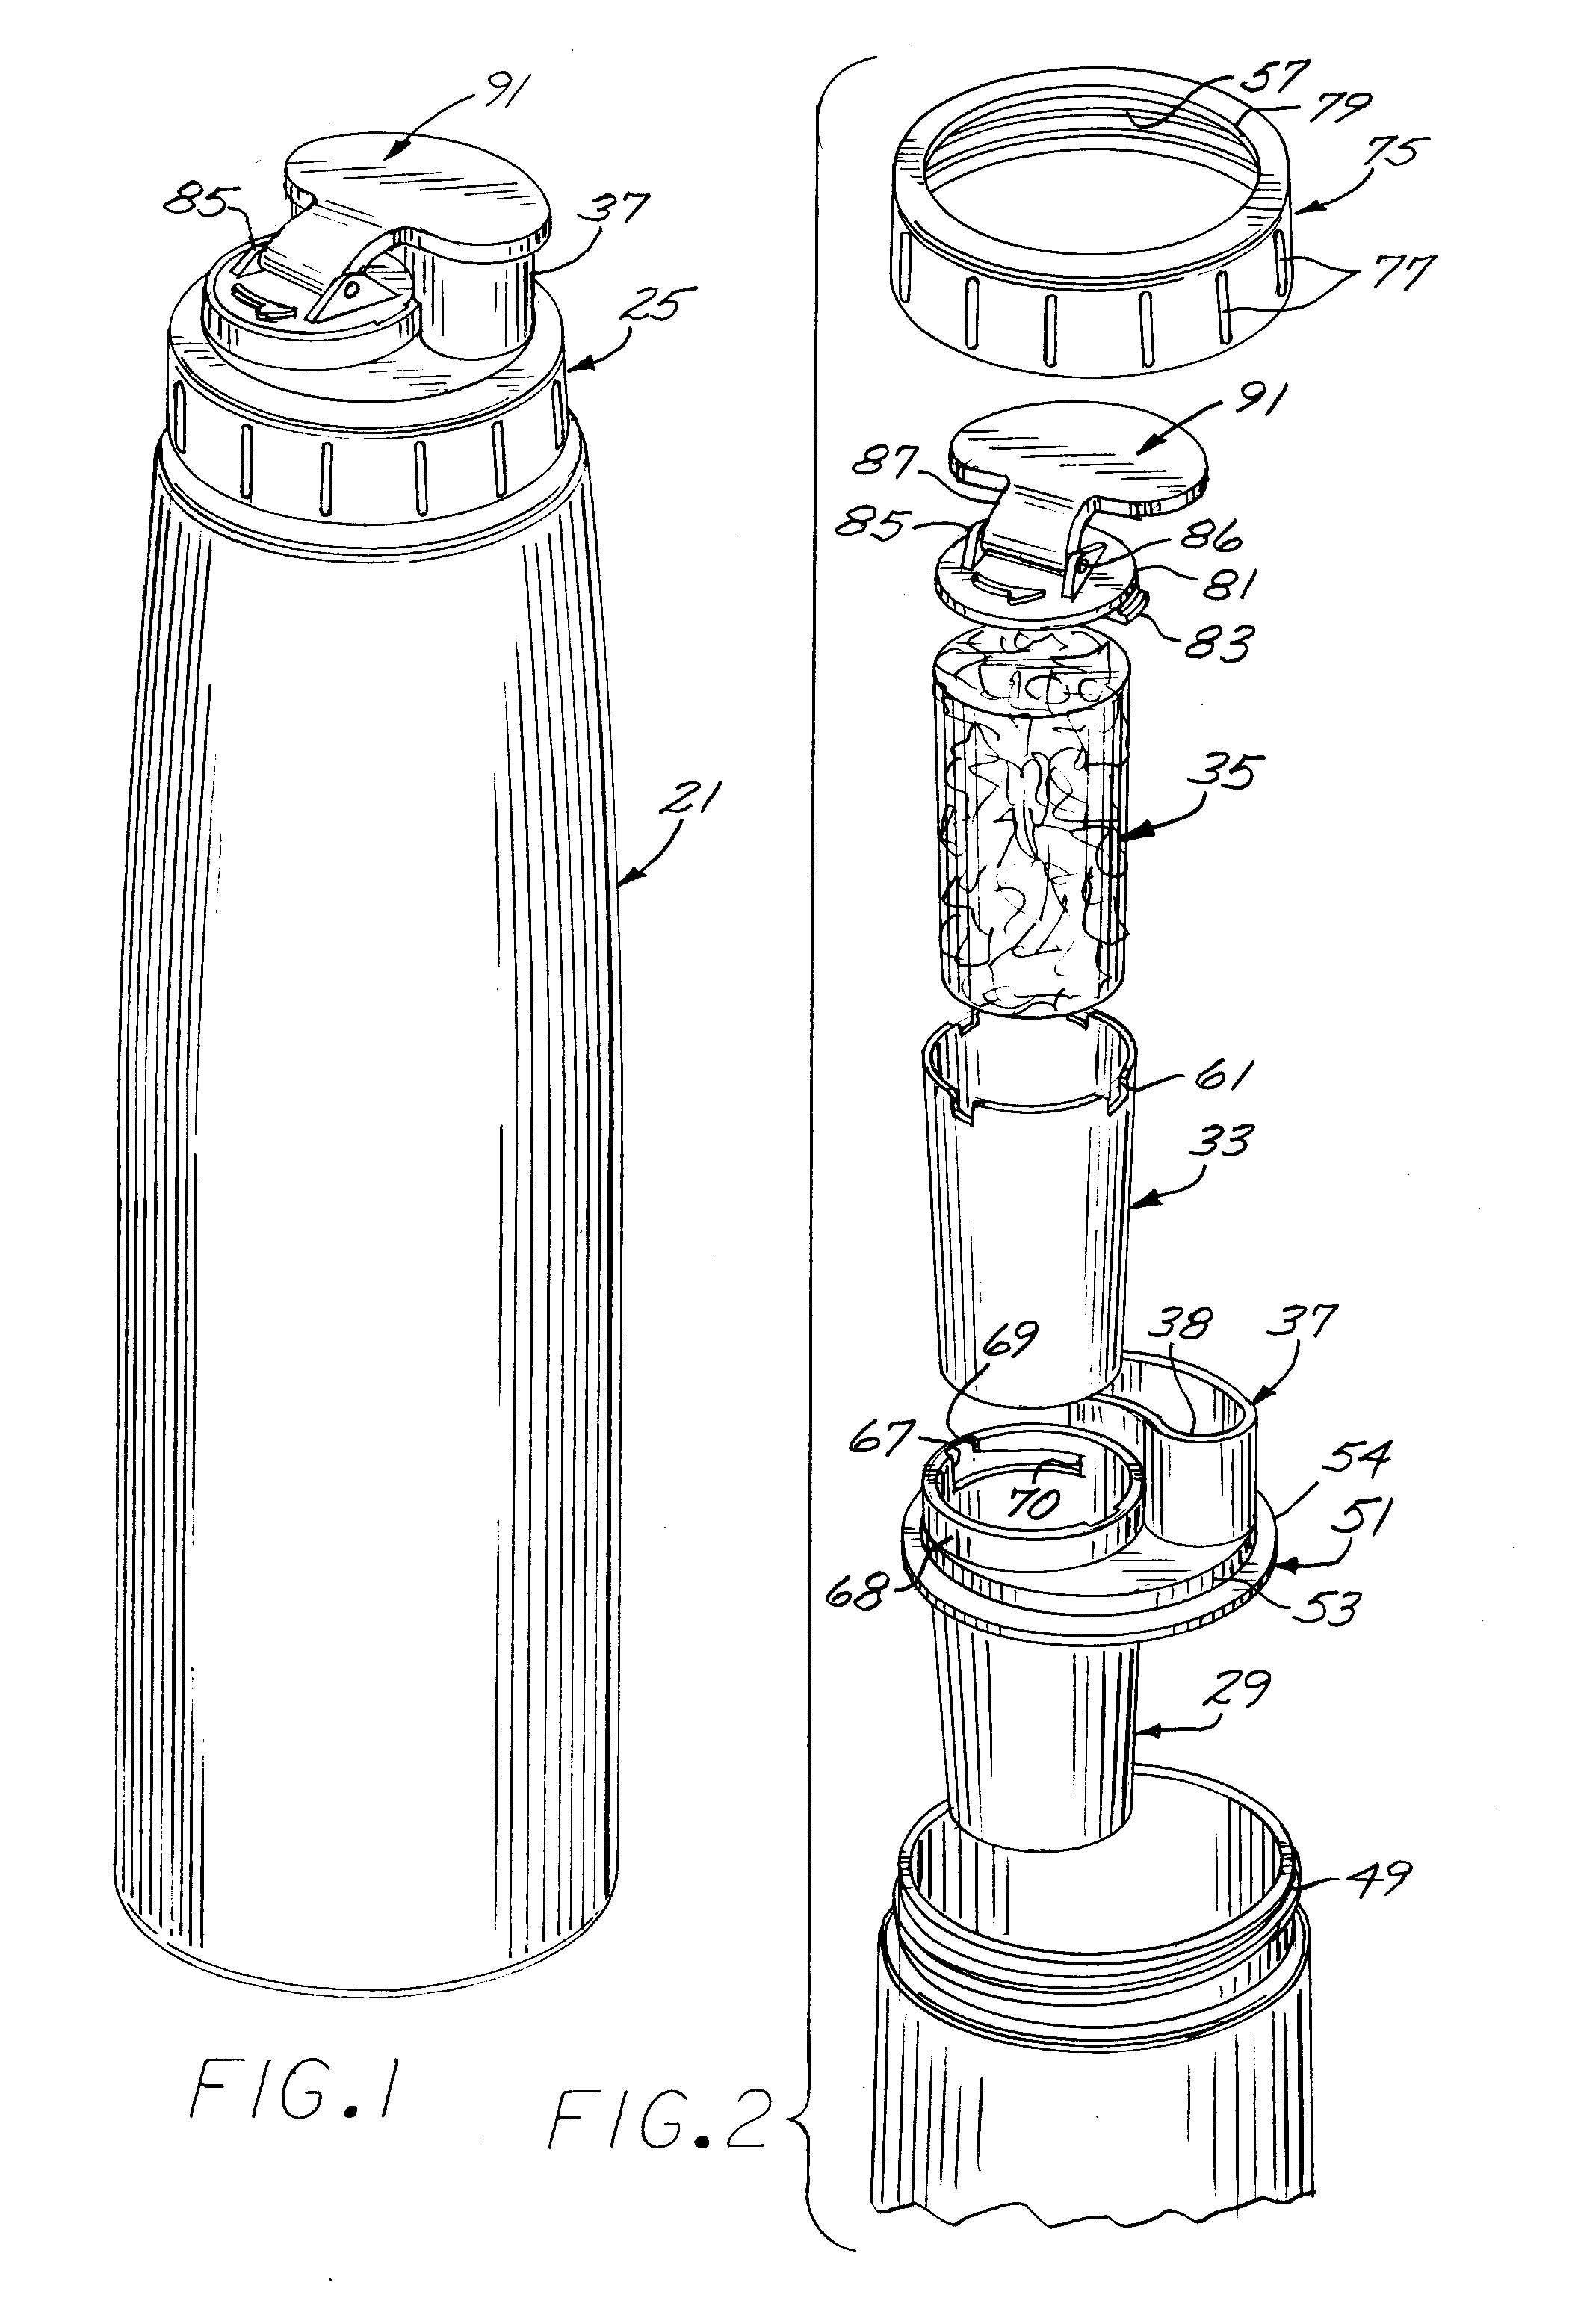 Sports bottle with top-mounted filter